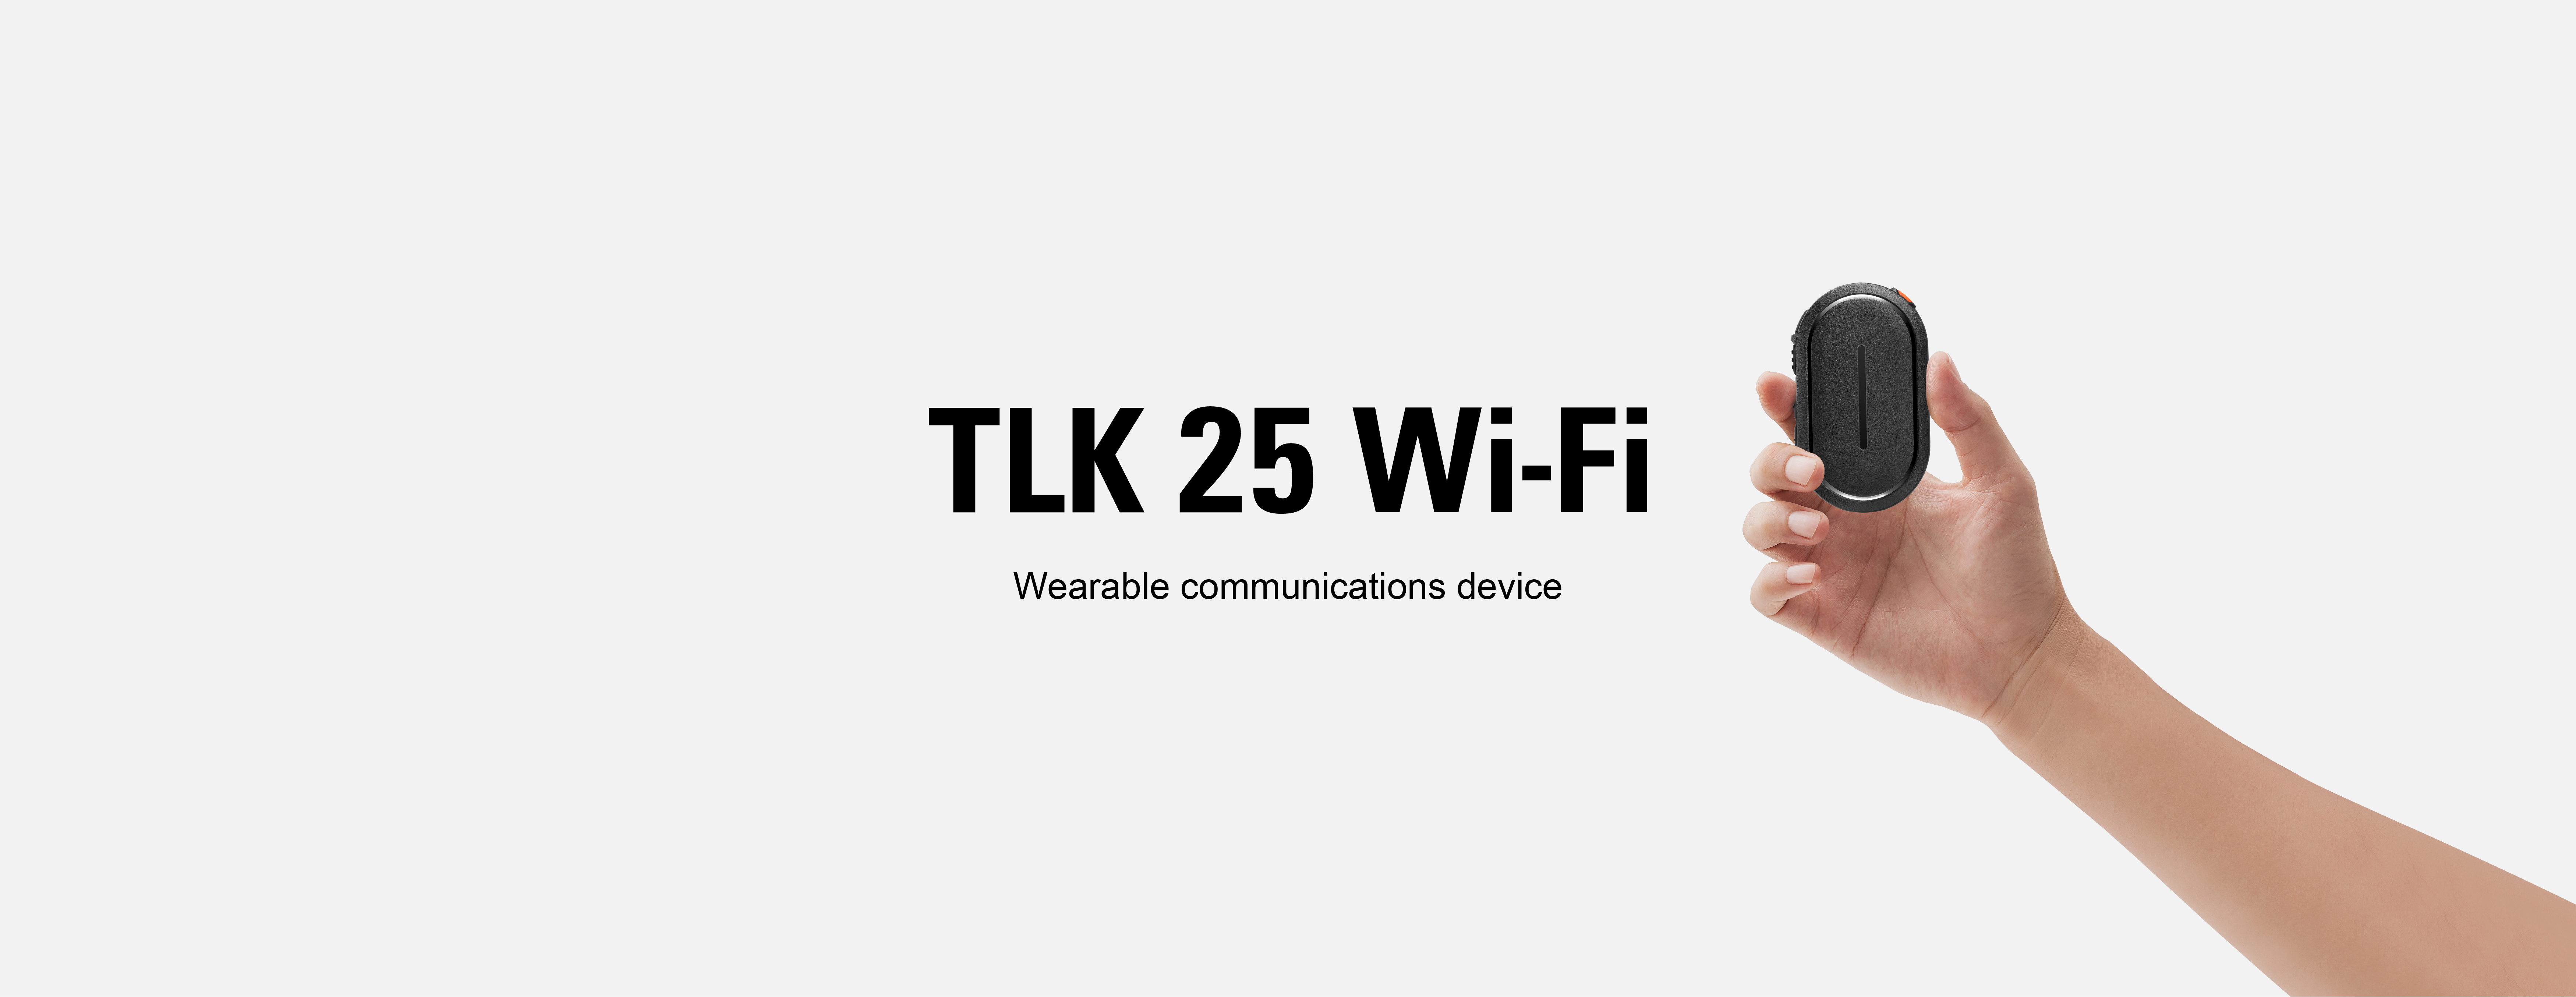 TLK 25 wearable communications device in hand